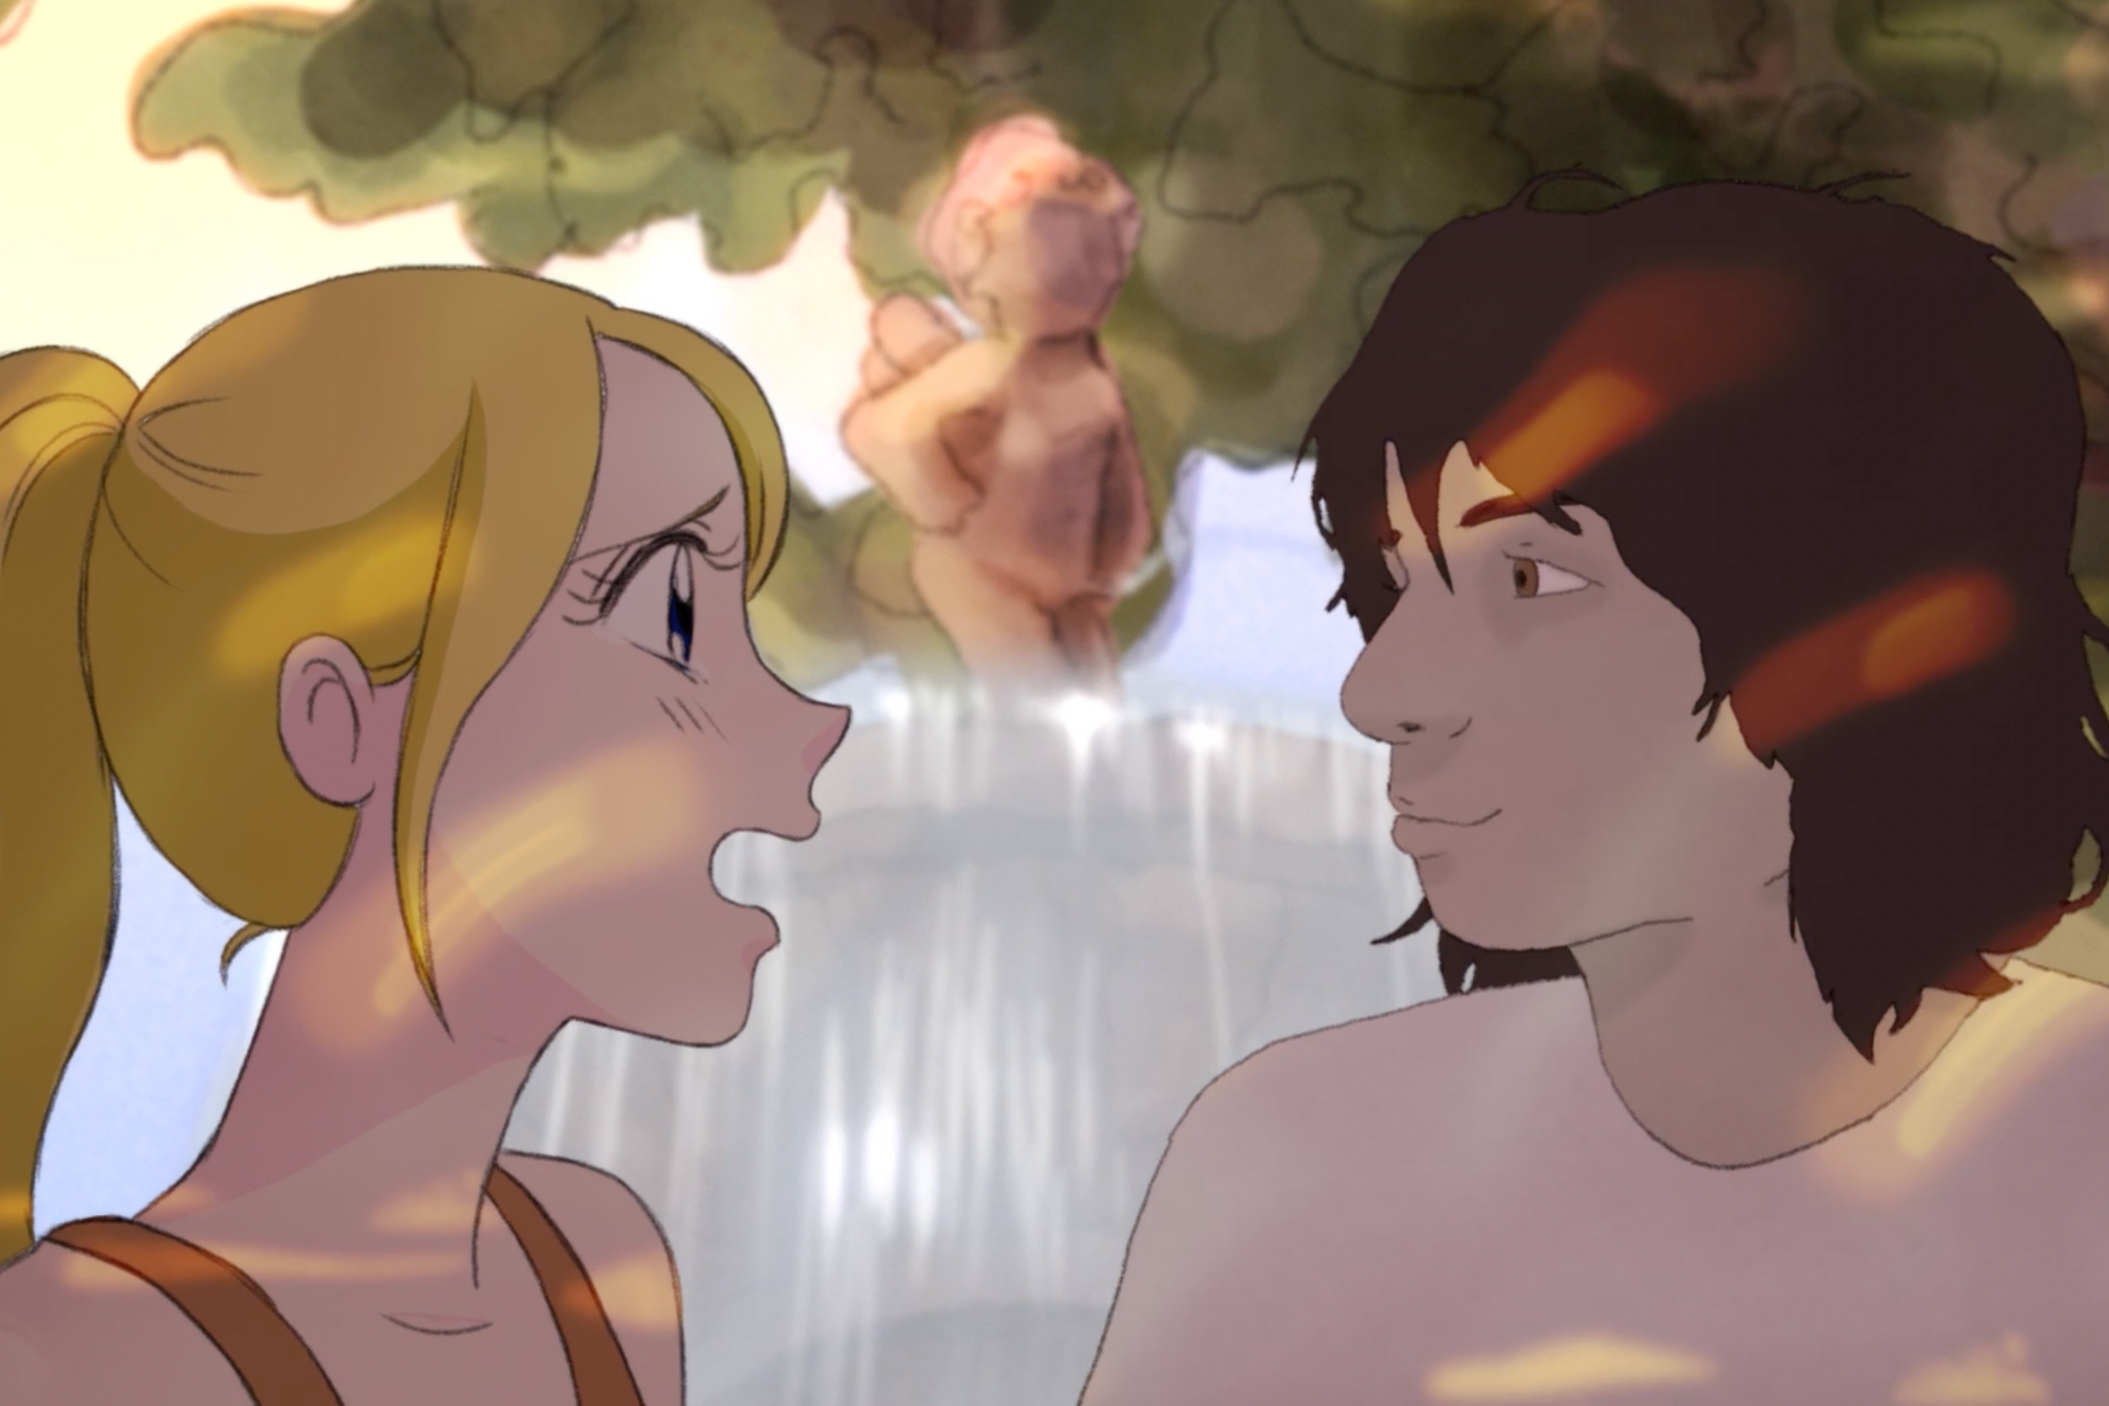 A scene from My Year of Dicks shows a blonde girl with starry anime eyes on the left talking to a more traditionally animated handsome teen boy with shaggy brown hair